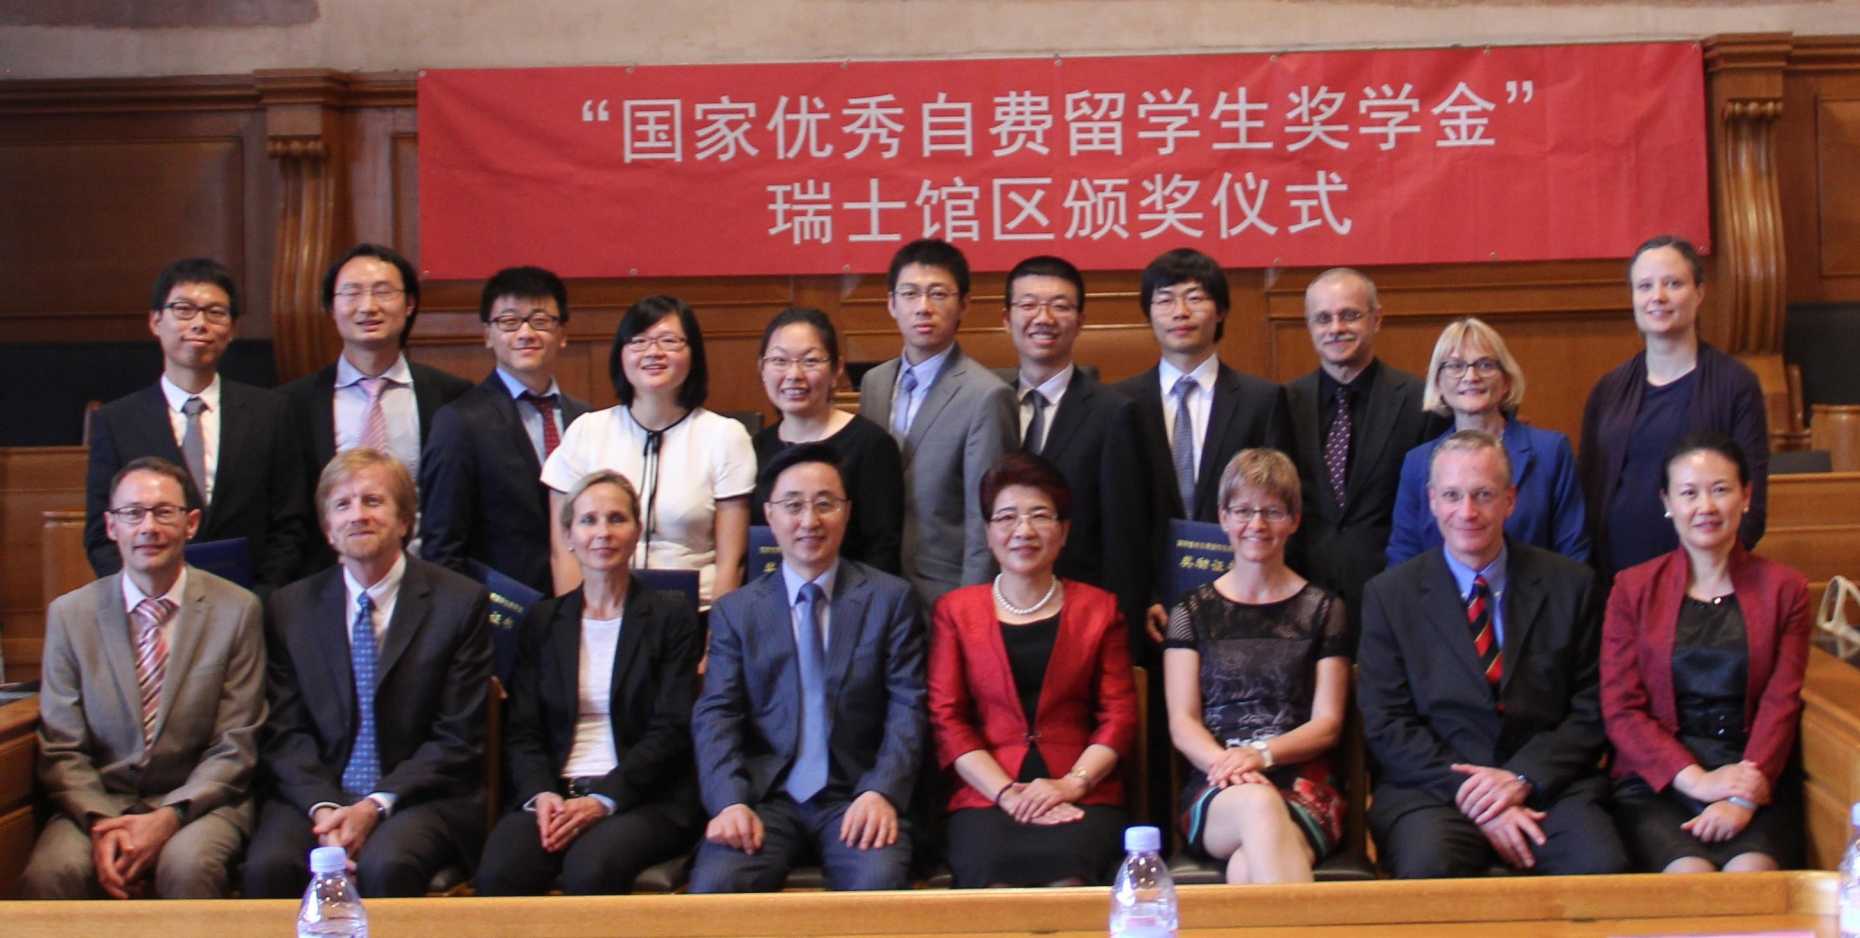 Enlarged view: National Award for Outstanding Self-financed Chinese Students Study Abroad